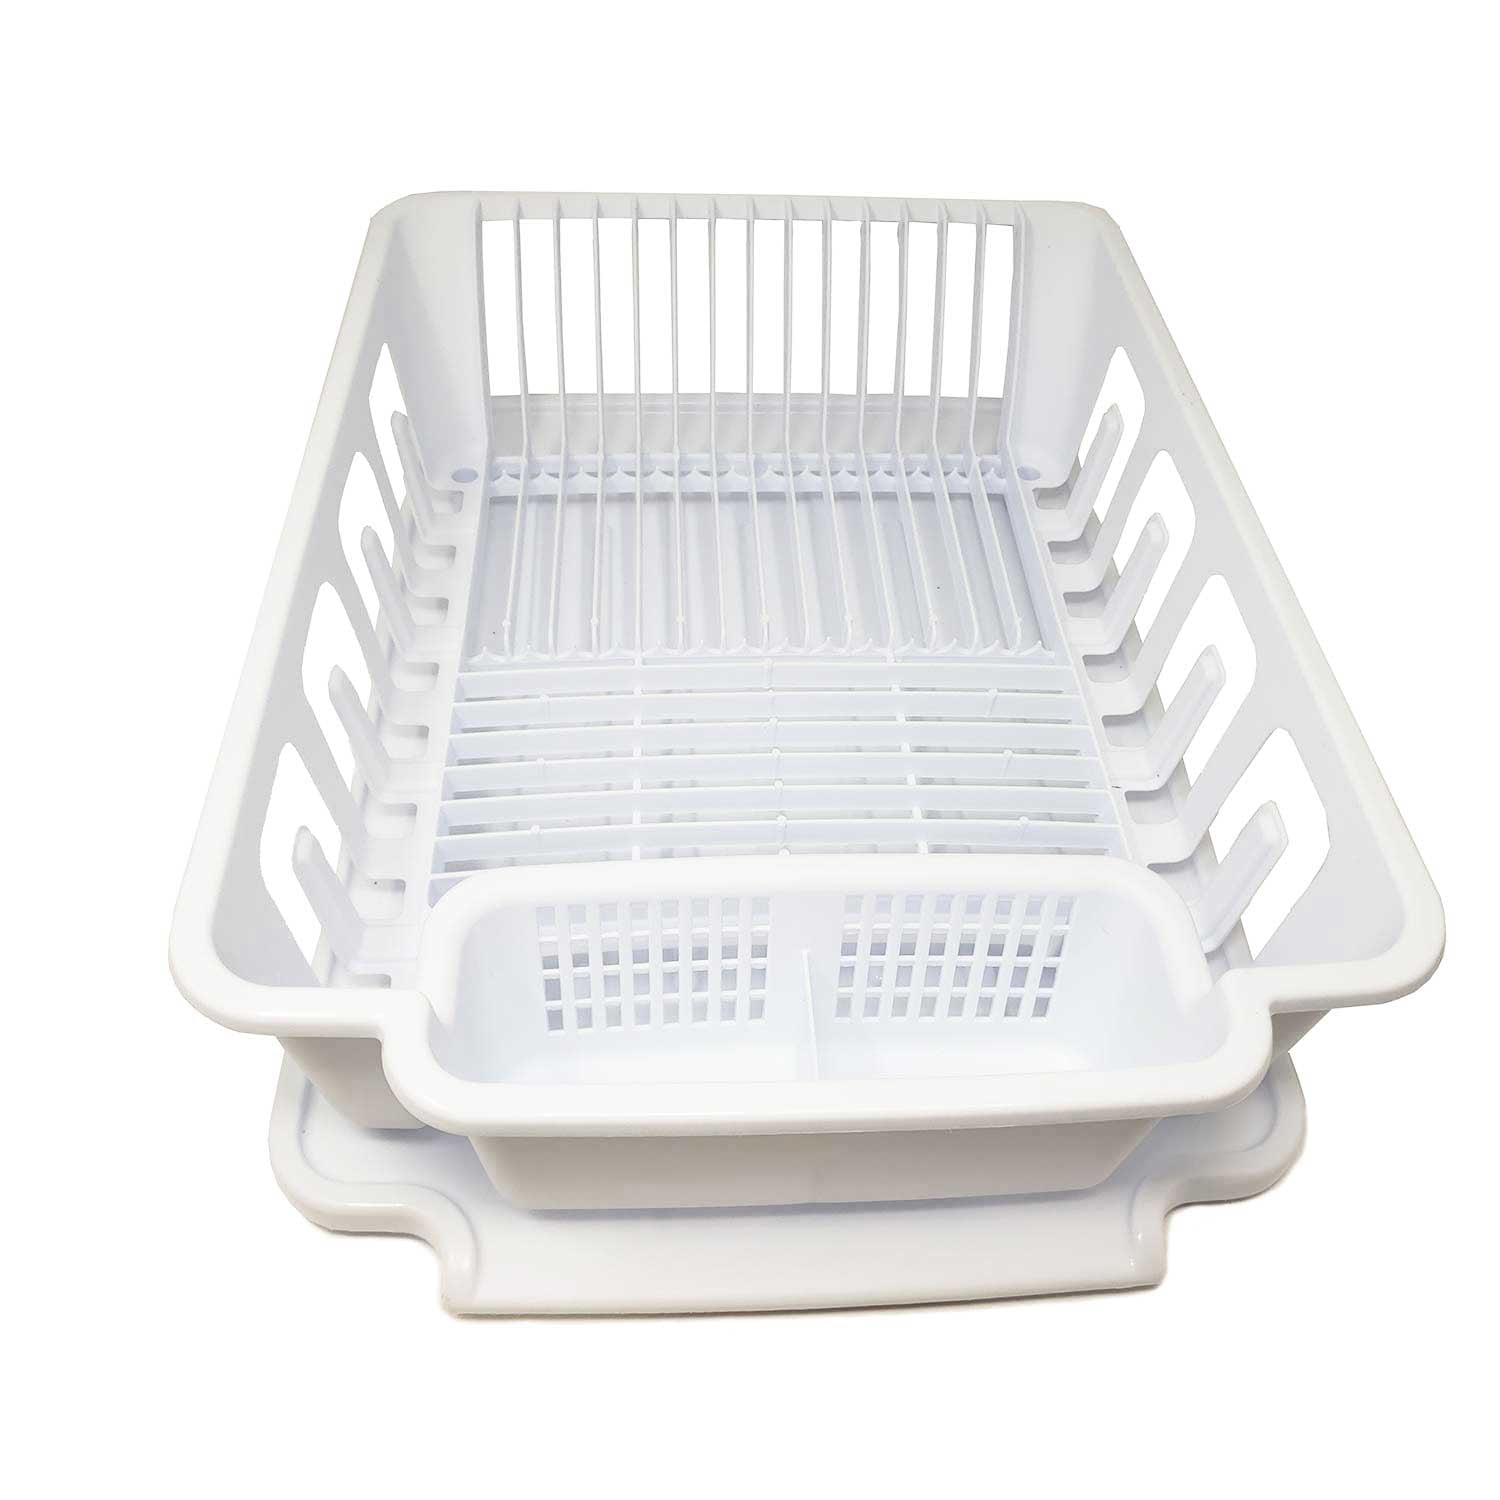 Kitchen Craft Deluxe Dish Drainer with Drip Tray, 42 cm x 30.5 cm x 15.5  cm, Silver